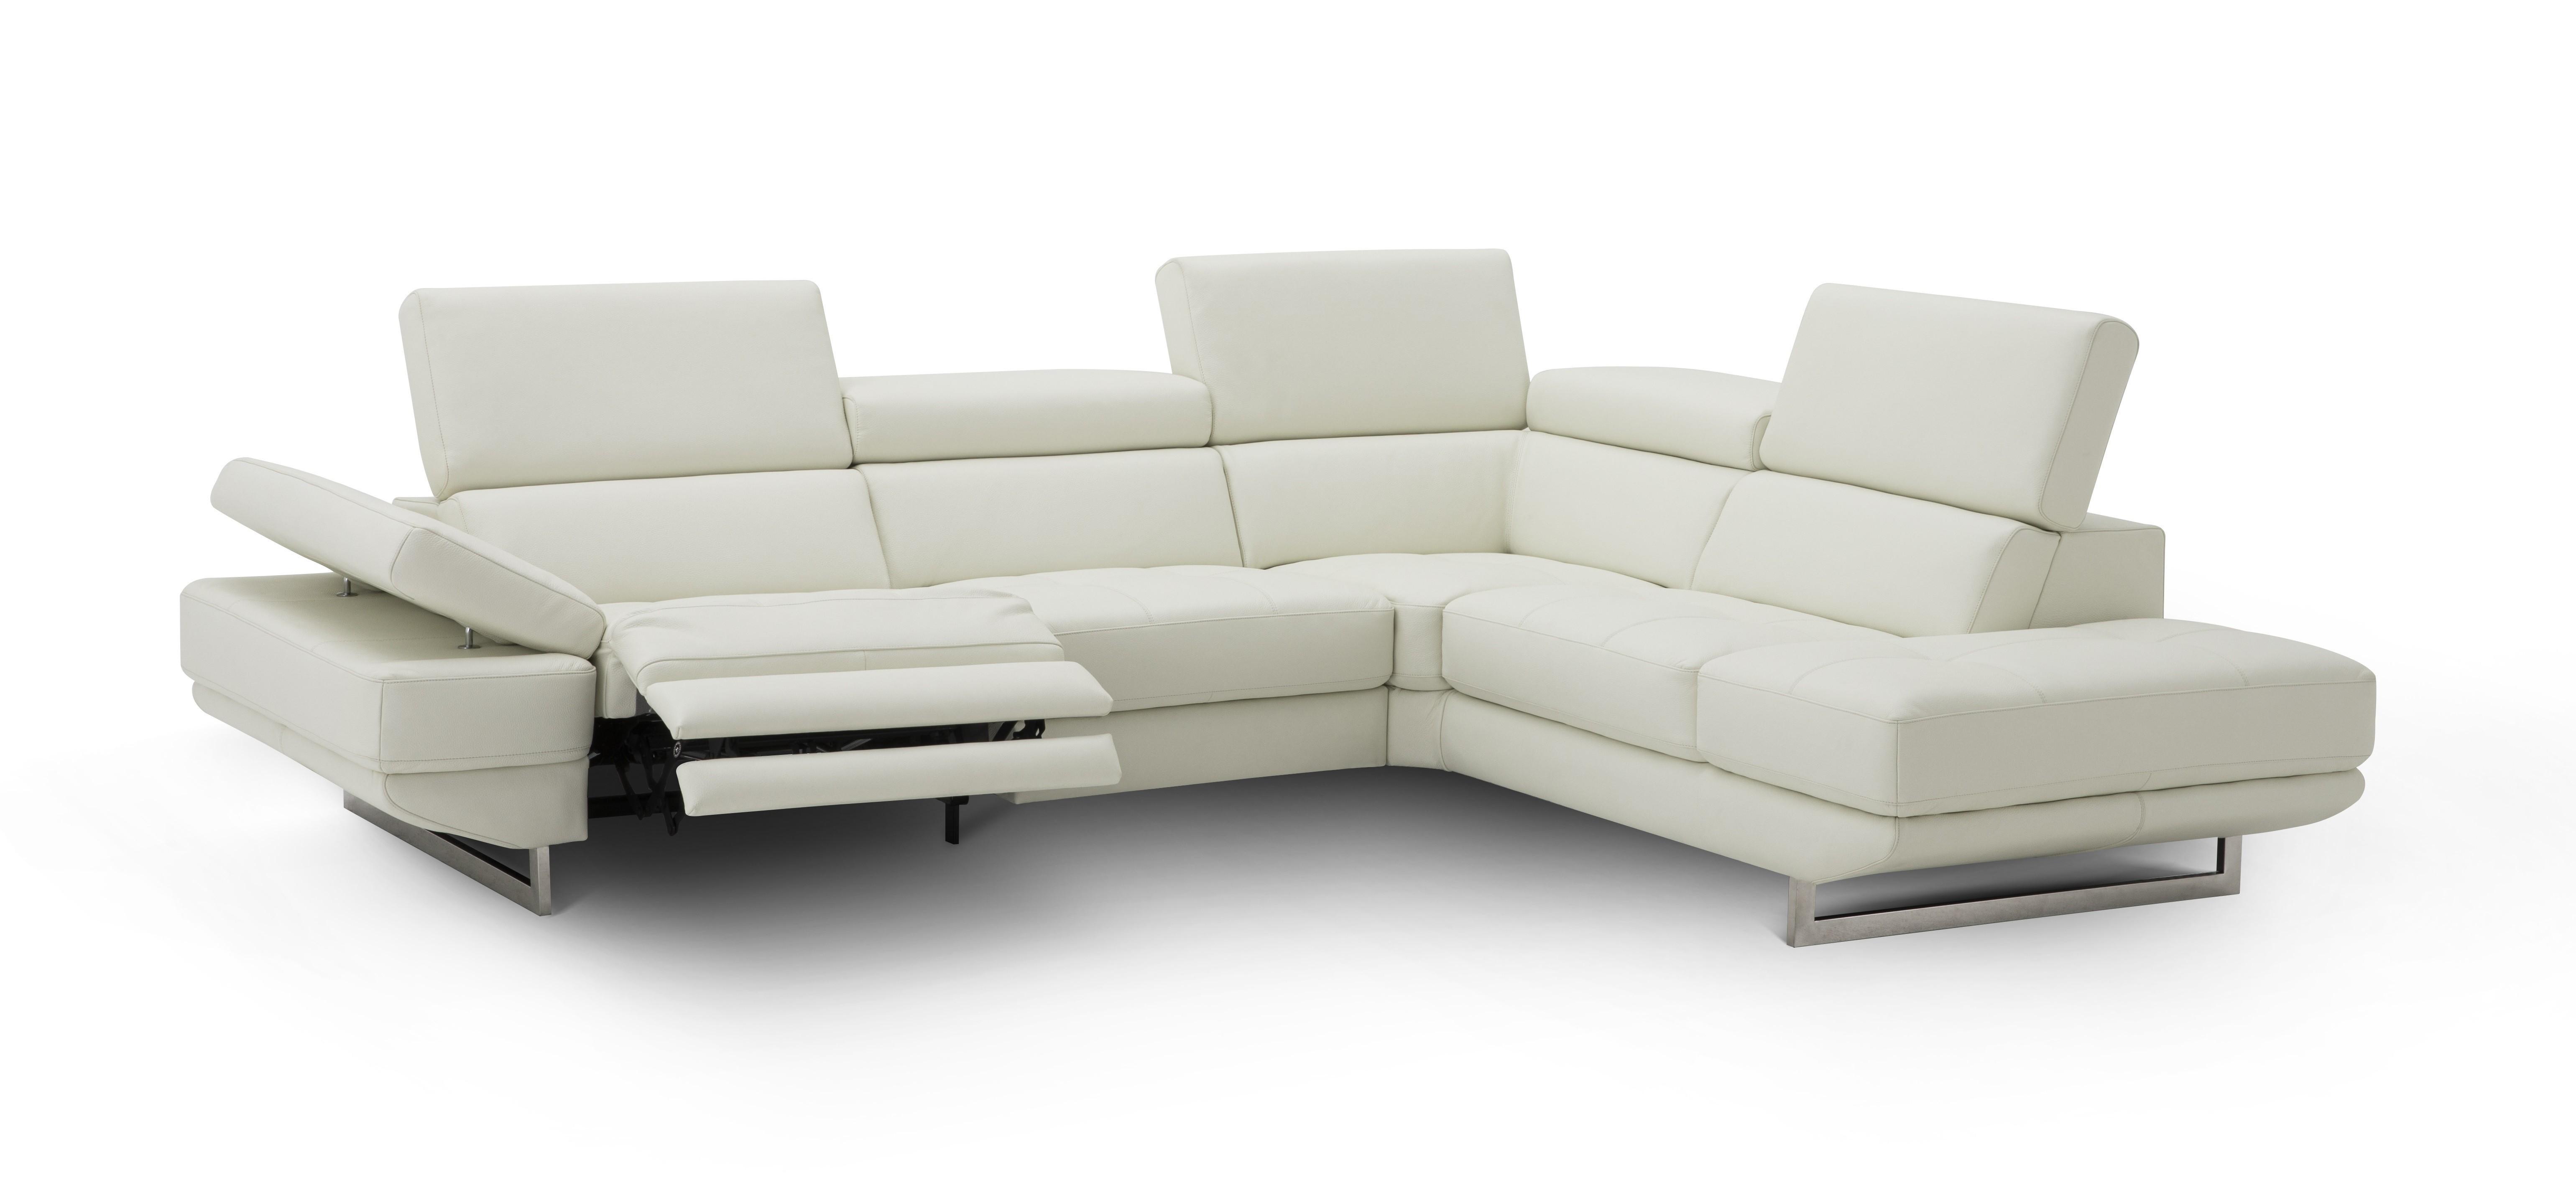 Modern Reclining Sectional The Annalaise 19966 in White Leather